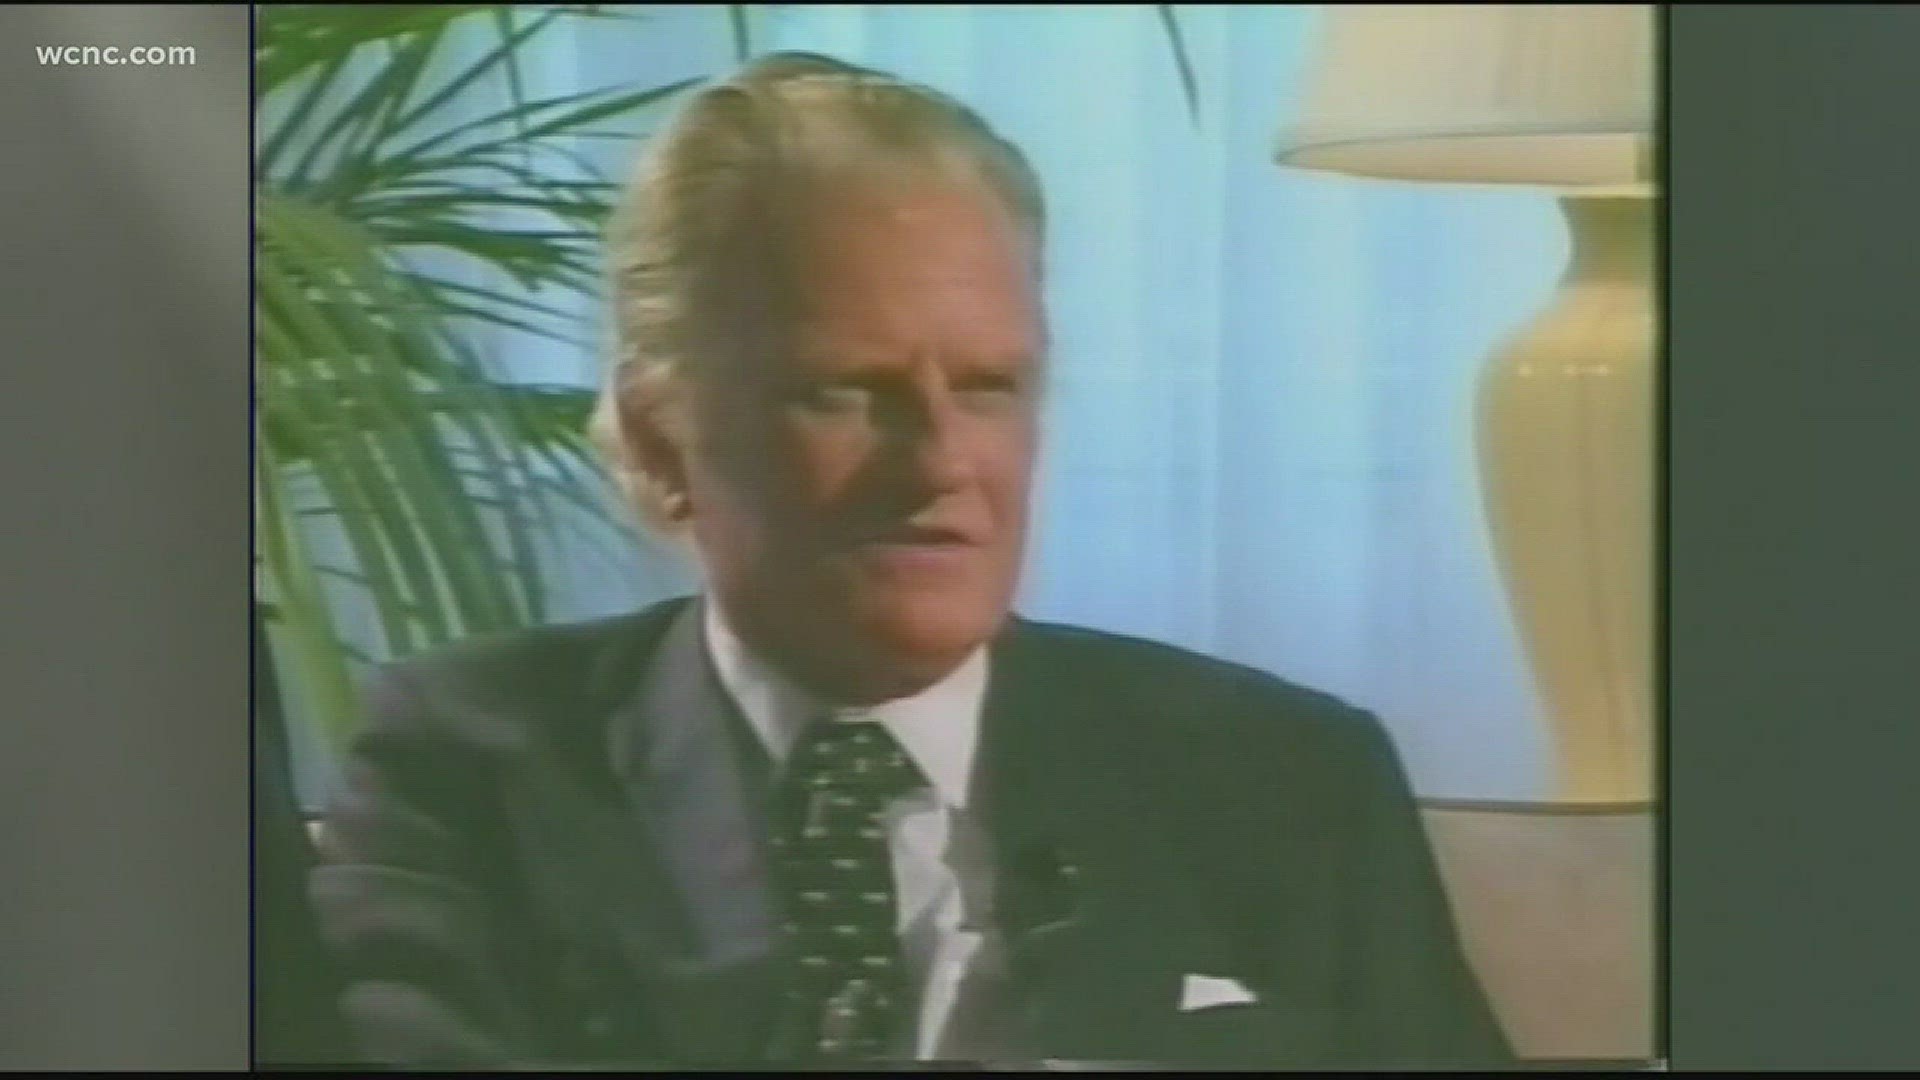 We are continuing to follow the breaking news of Rev. Billy Graham's death. He was 99 years old.